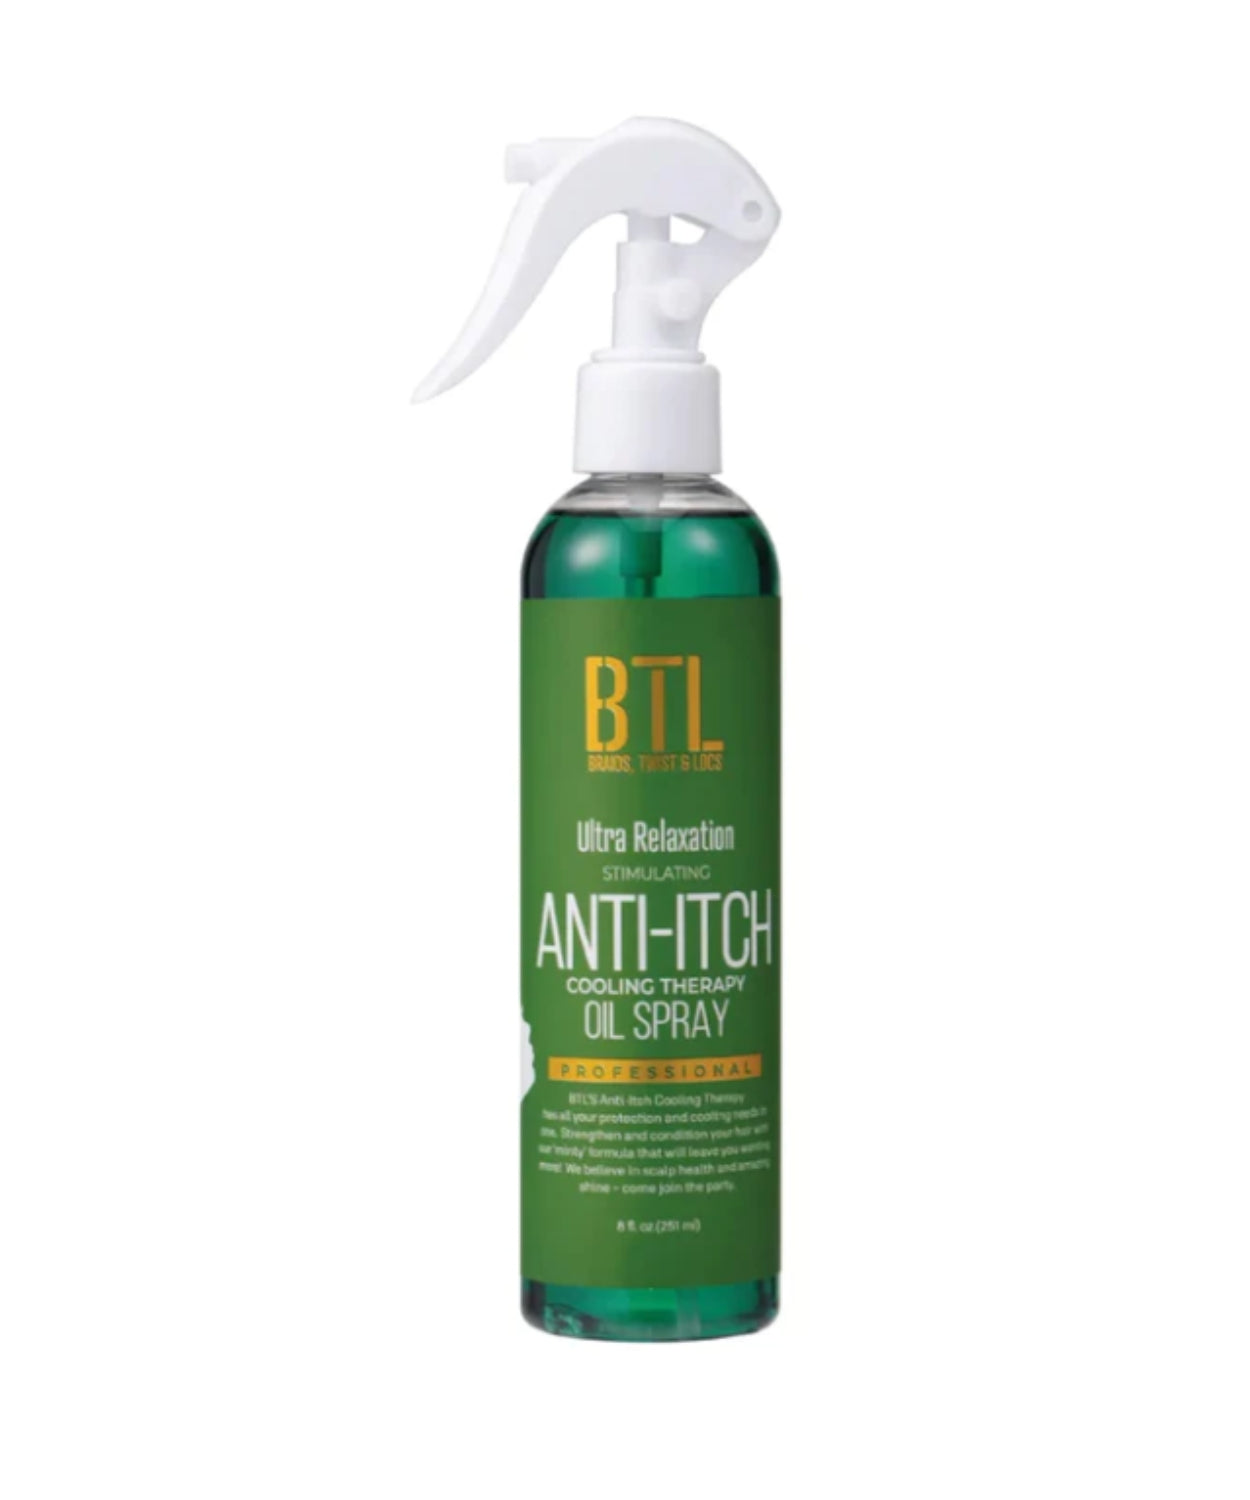 BTL Professional Ultra Relaxation Stimulating Anti-Itch Cooling Therapy Oil Spray 8 OZ - BRAID BEAUTY